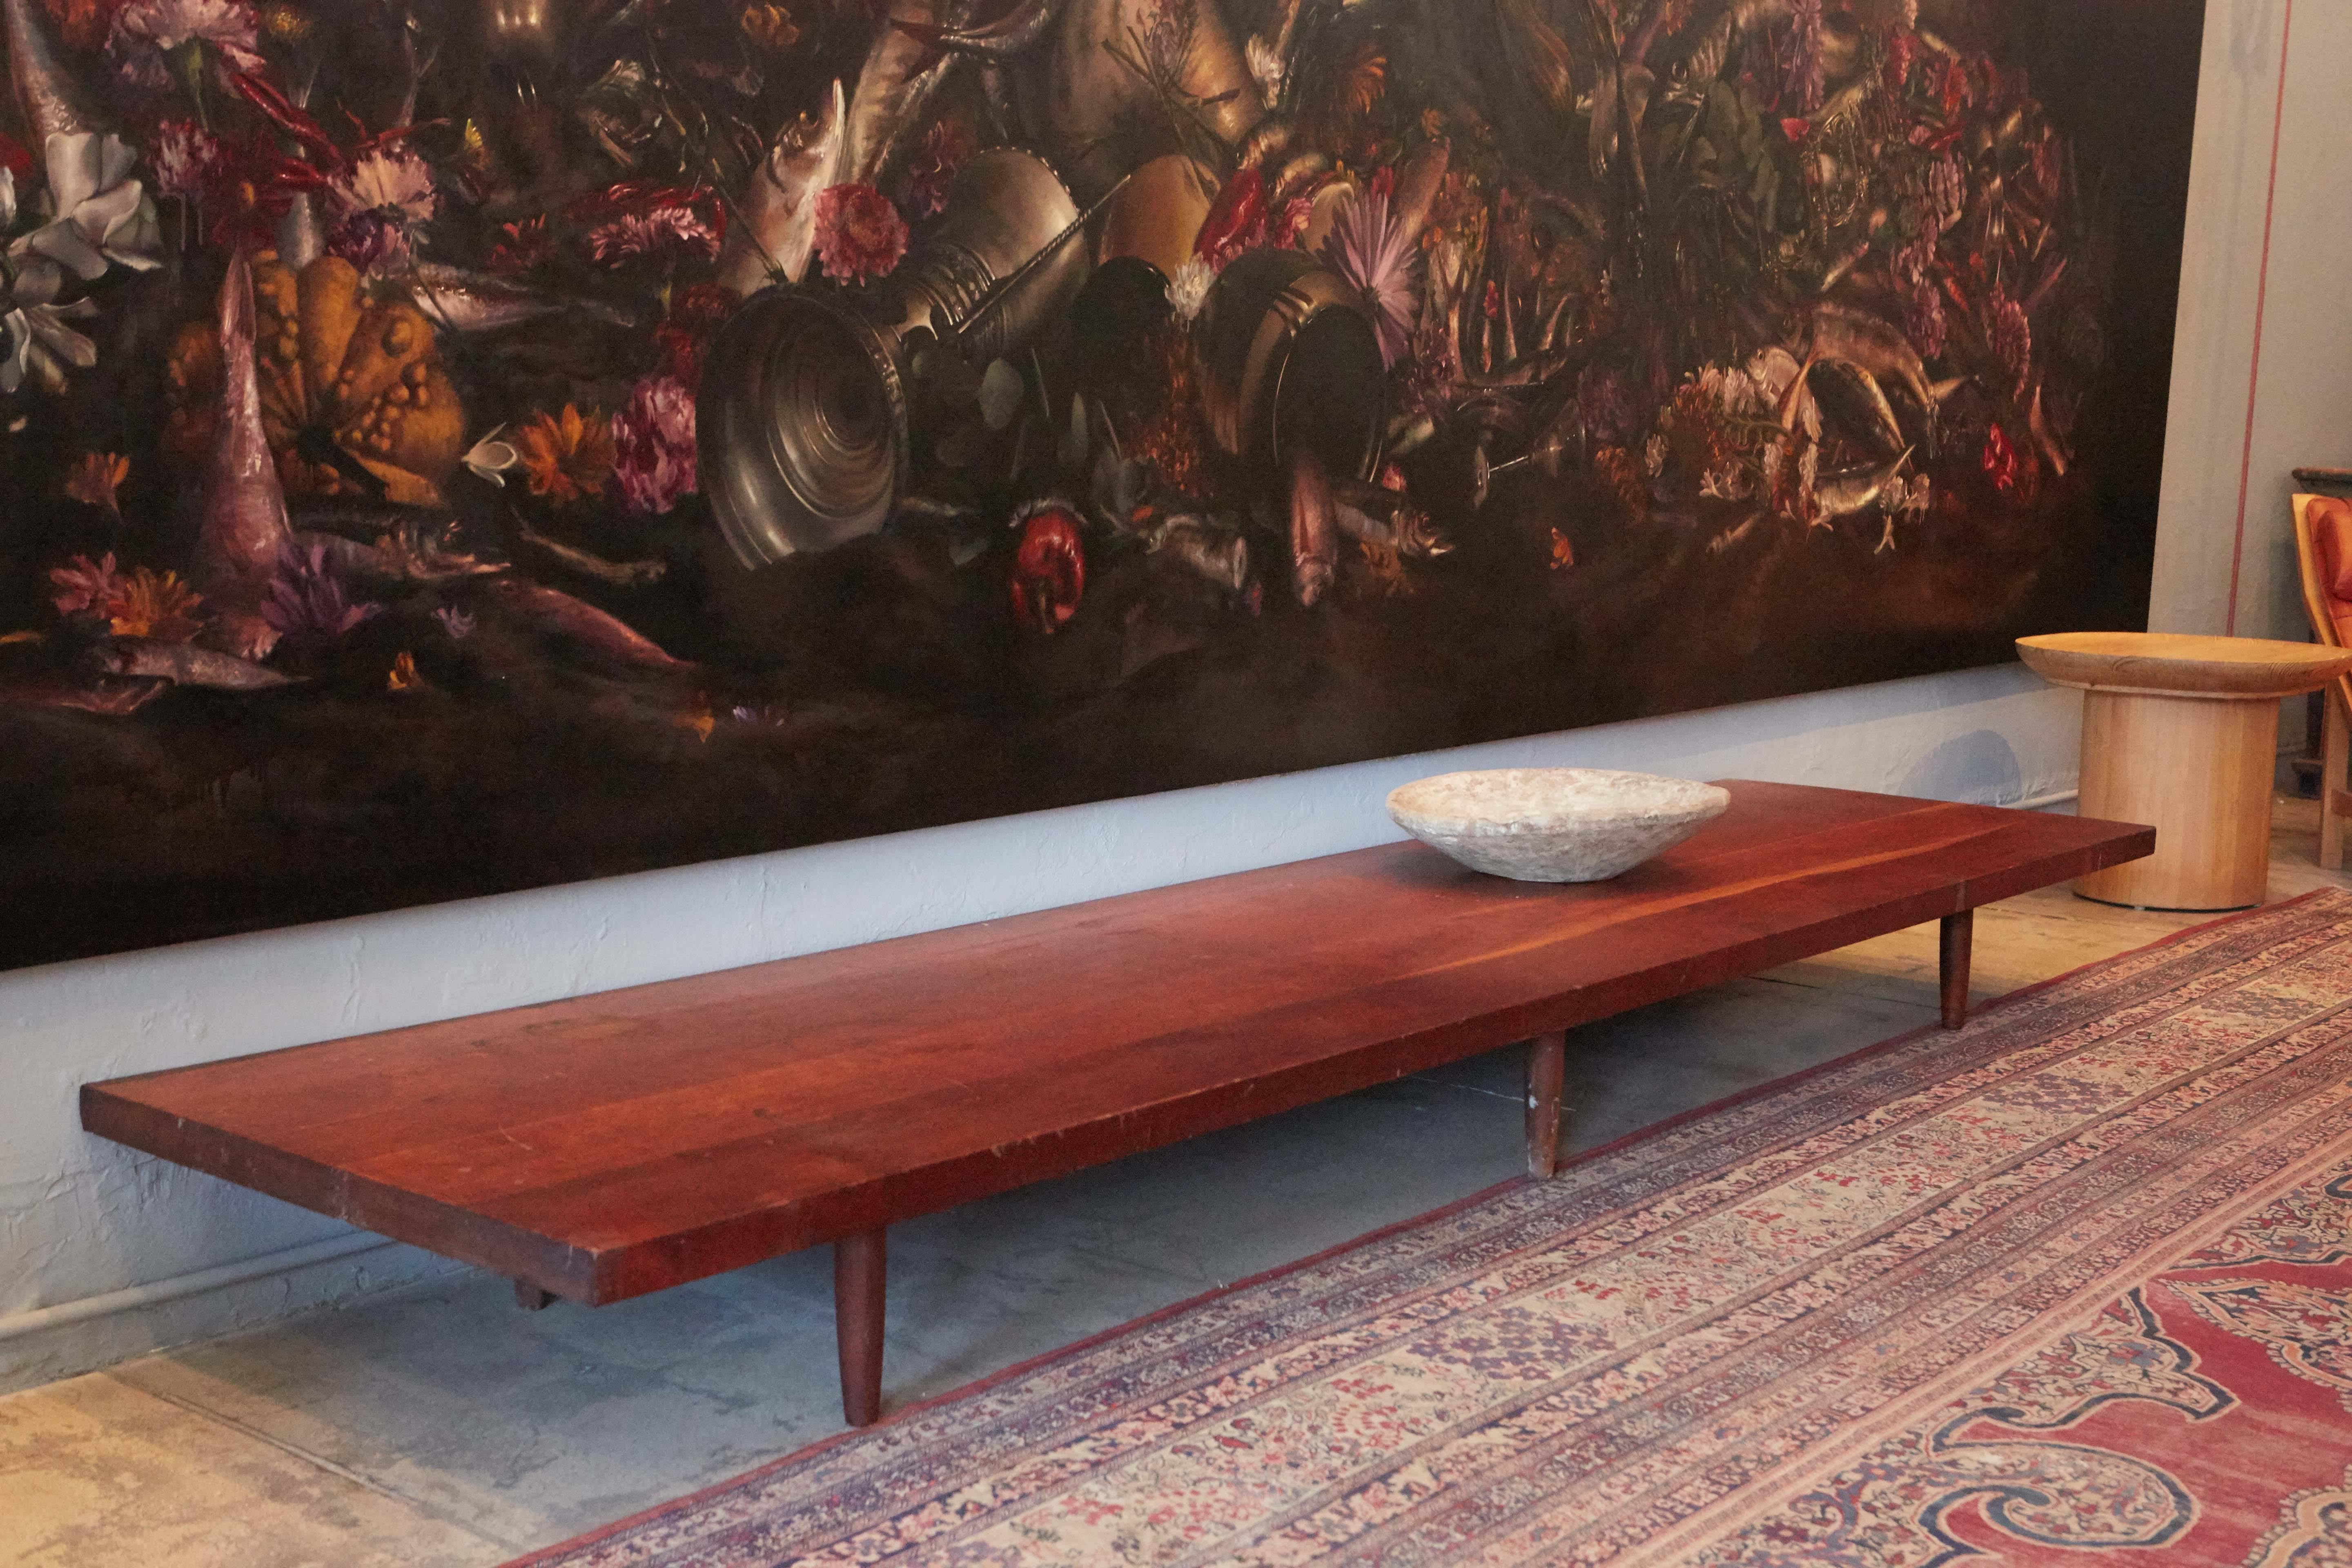 A beautiful long low cherrywood bench or table by George Nakashima.